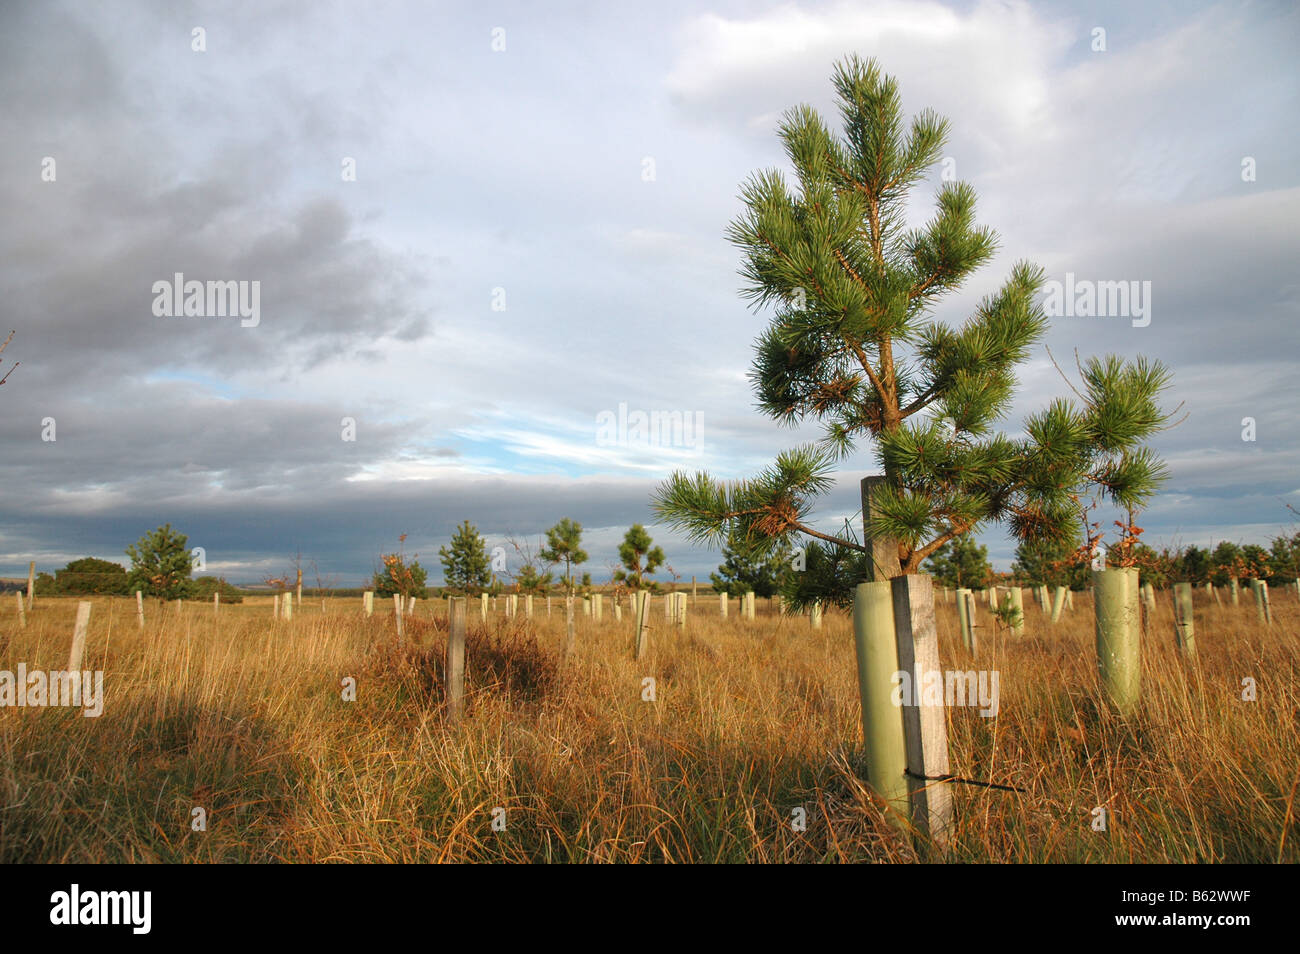 A field of young planted pine trees protected by poly pipes. Stock Photo